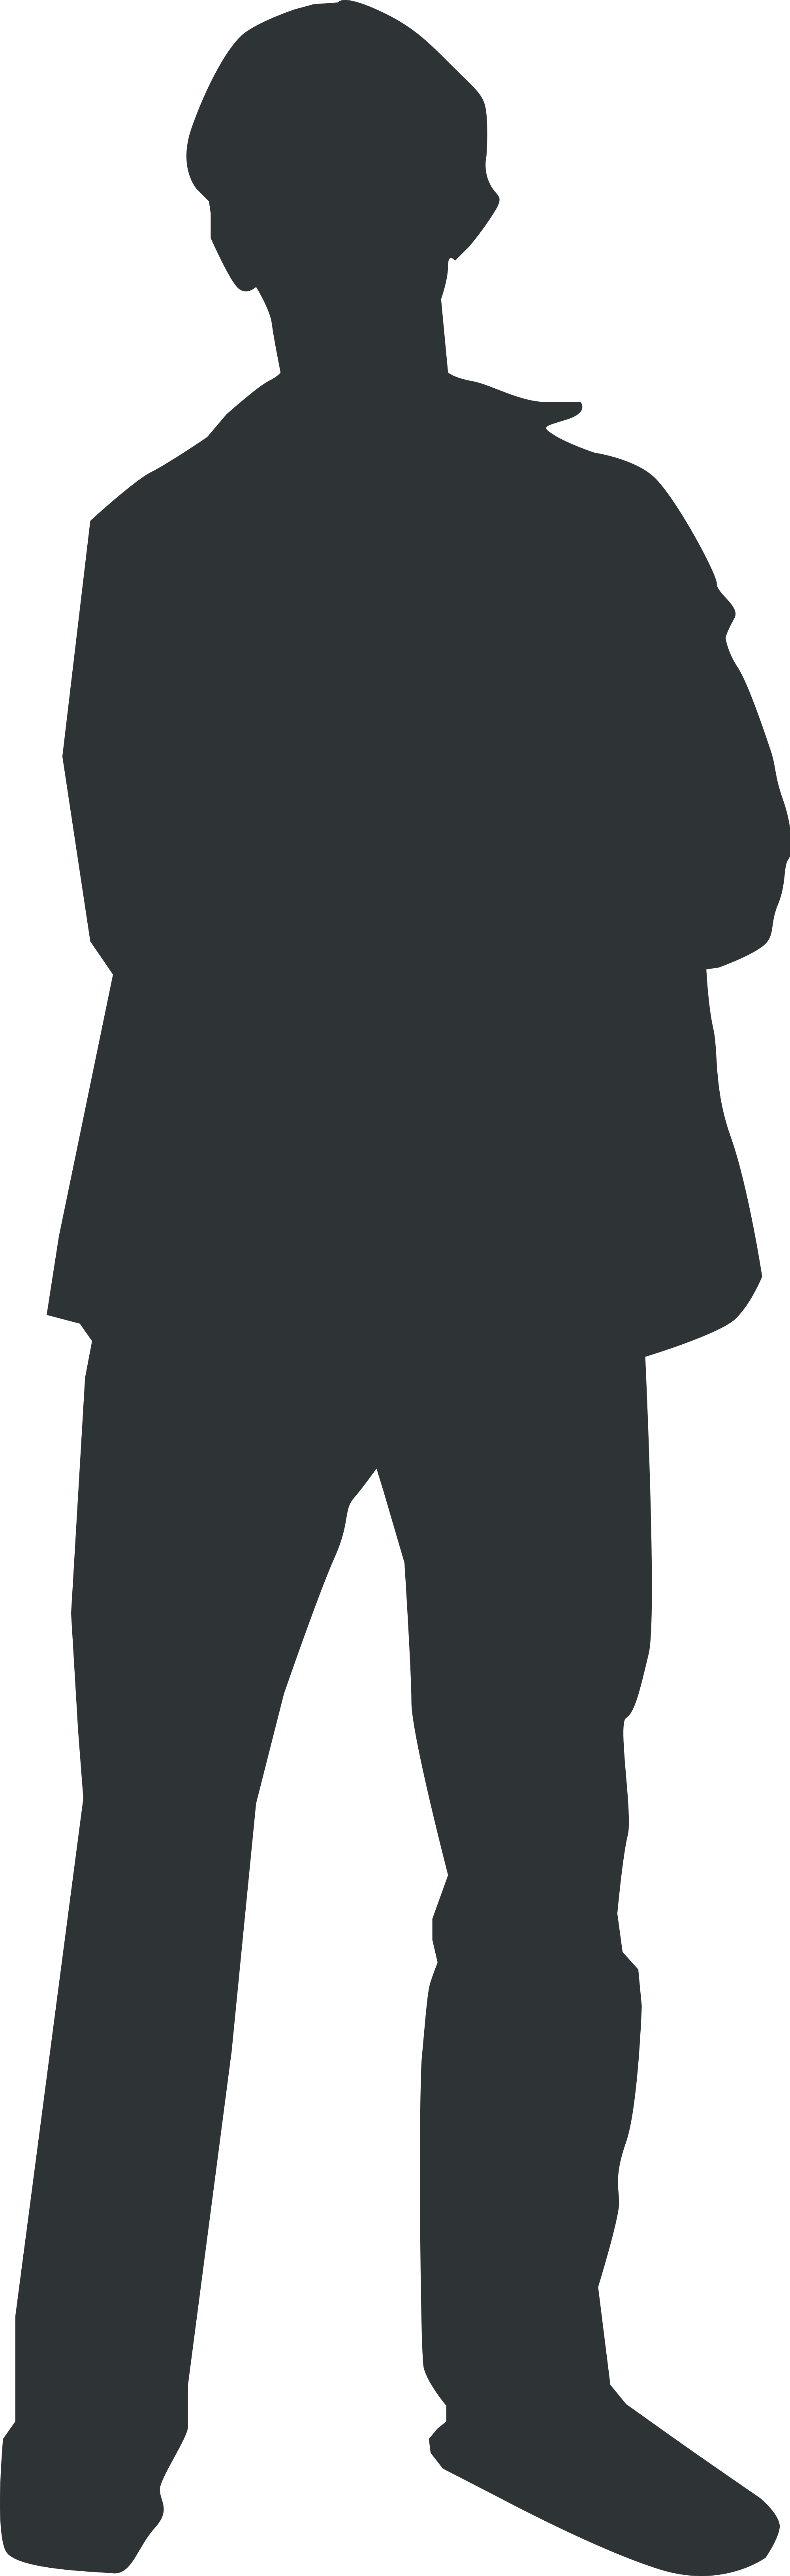 File:Person Outline 3.svg - Wikimedia Commons